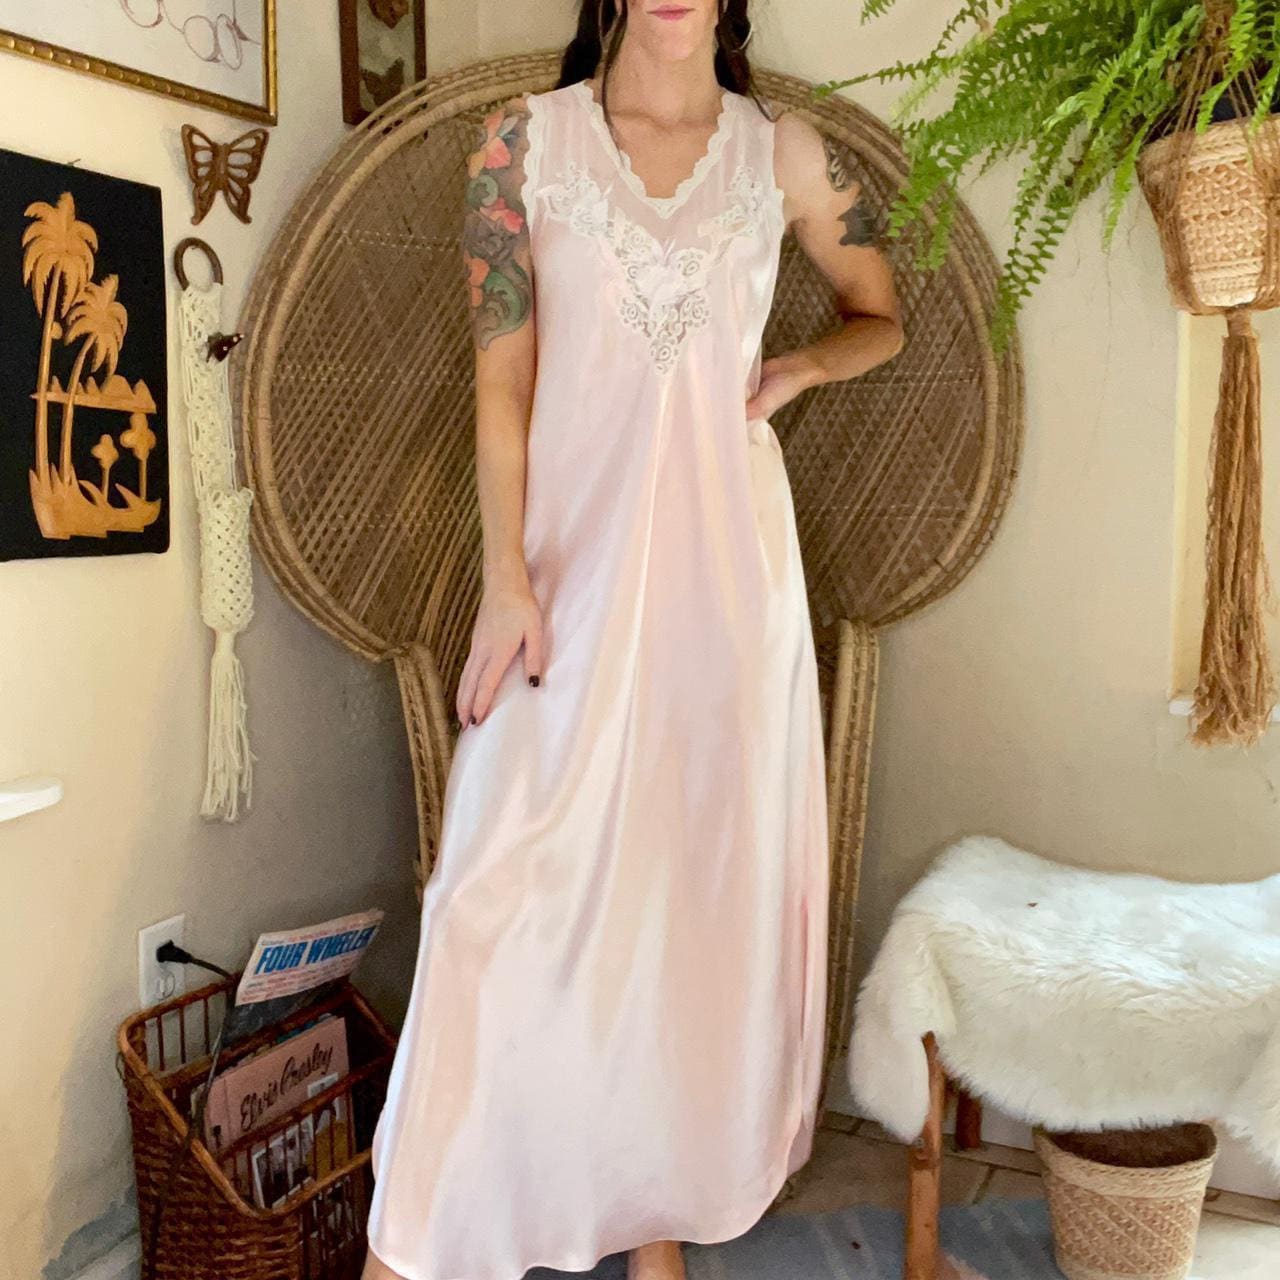 Antique Vintage Pink Silk Lace Nightgown Slip Dress Lace Accents - Ruby Lane